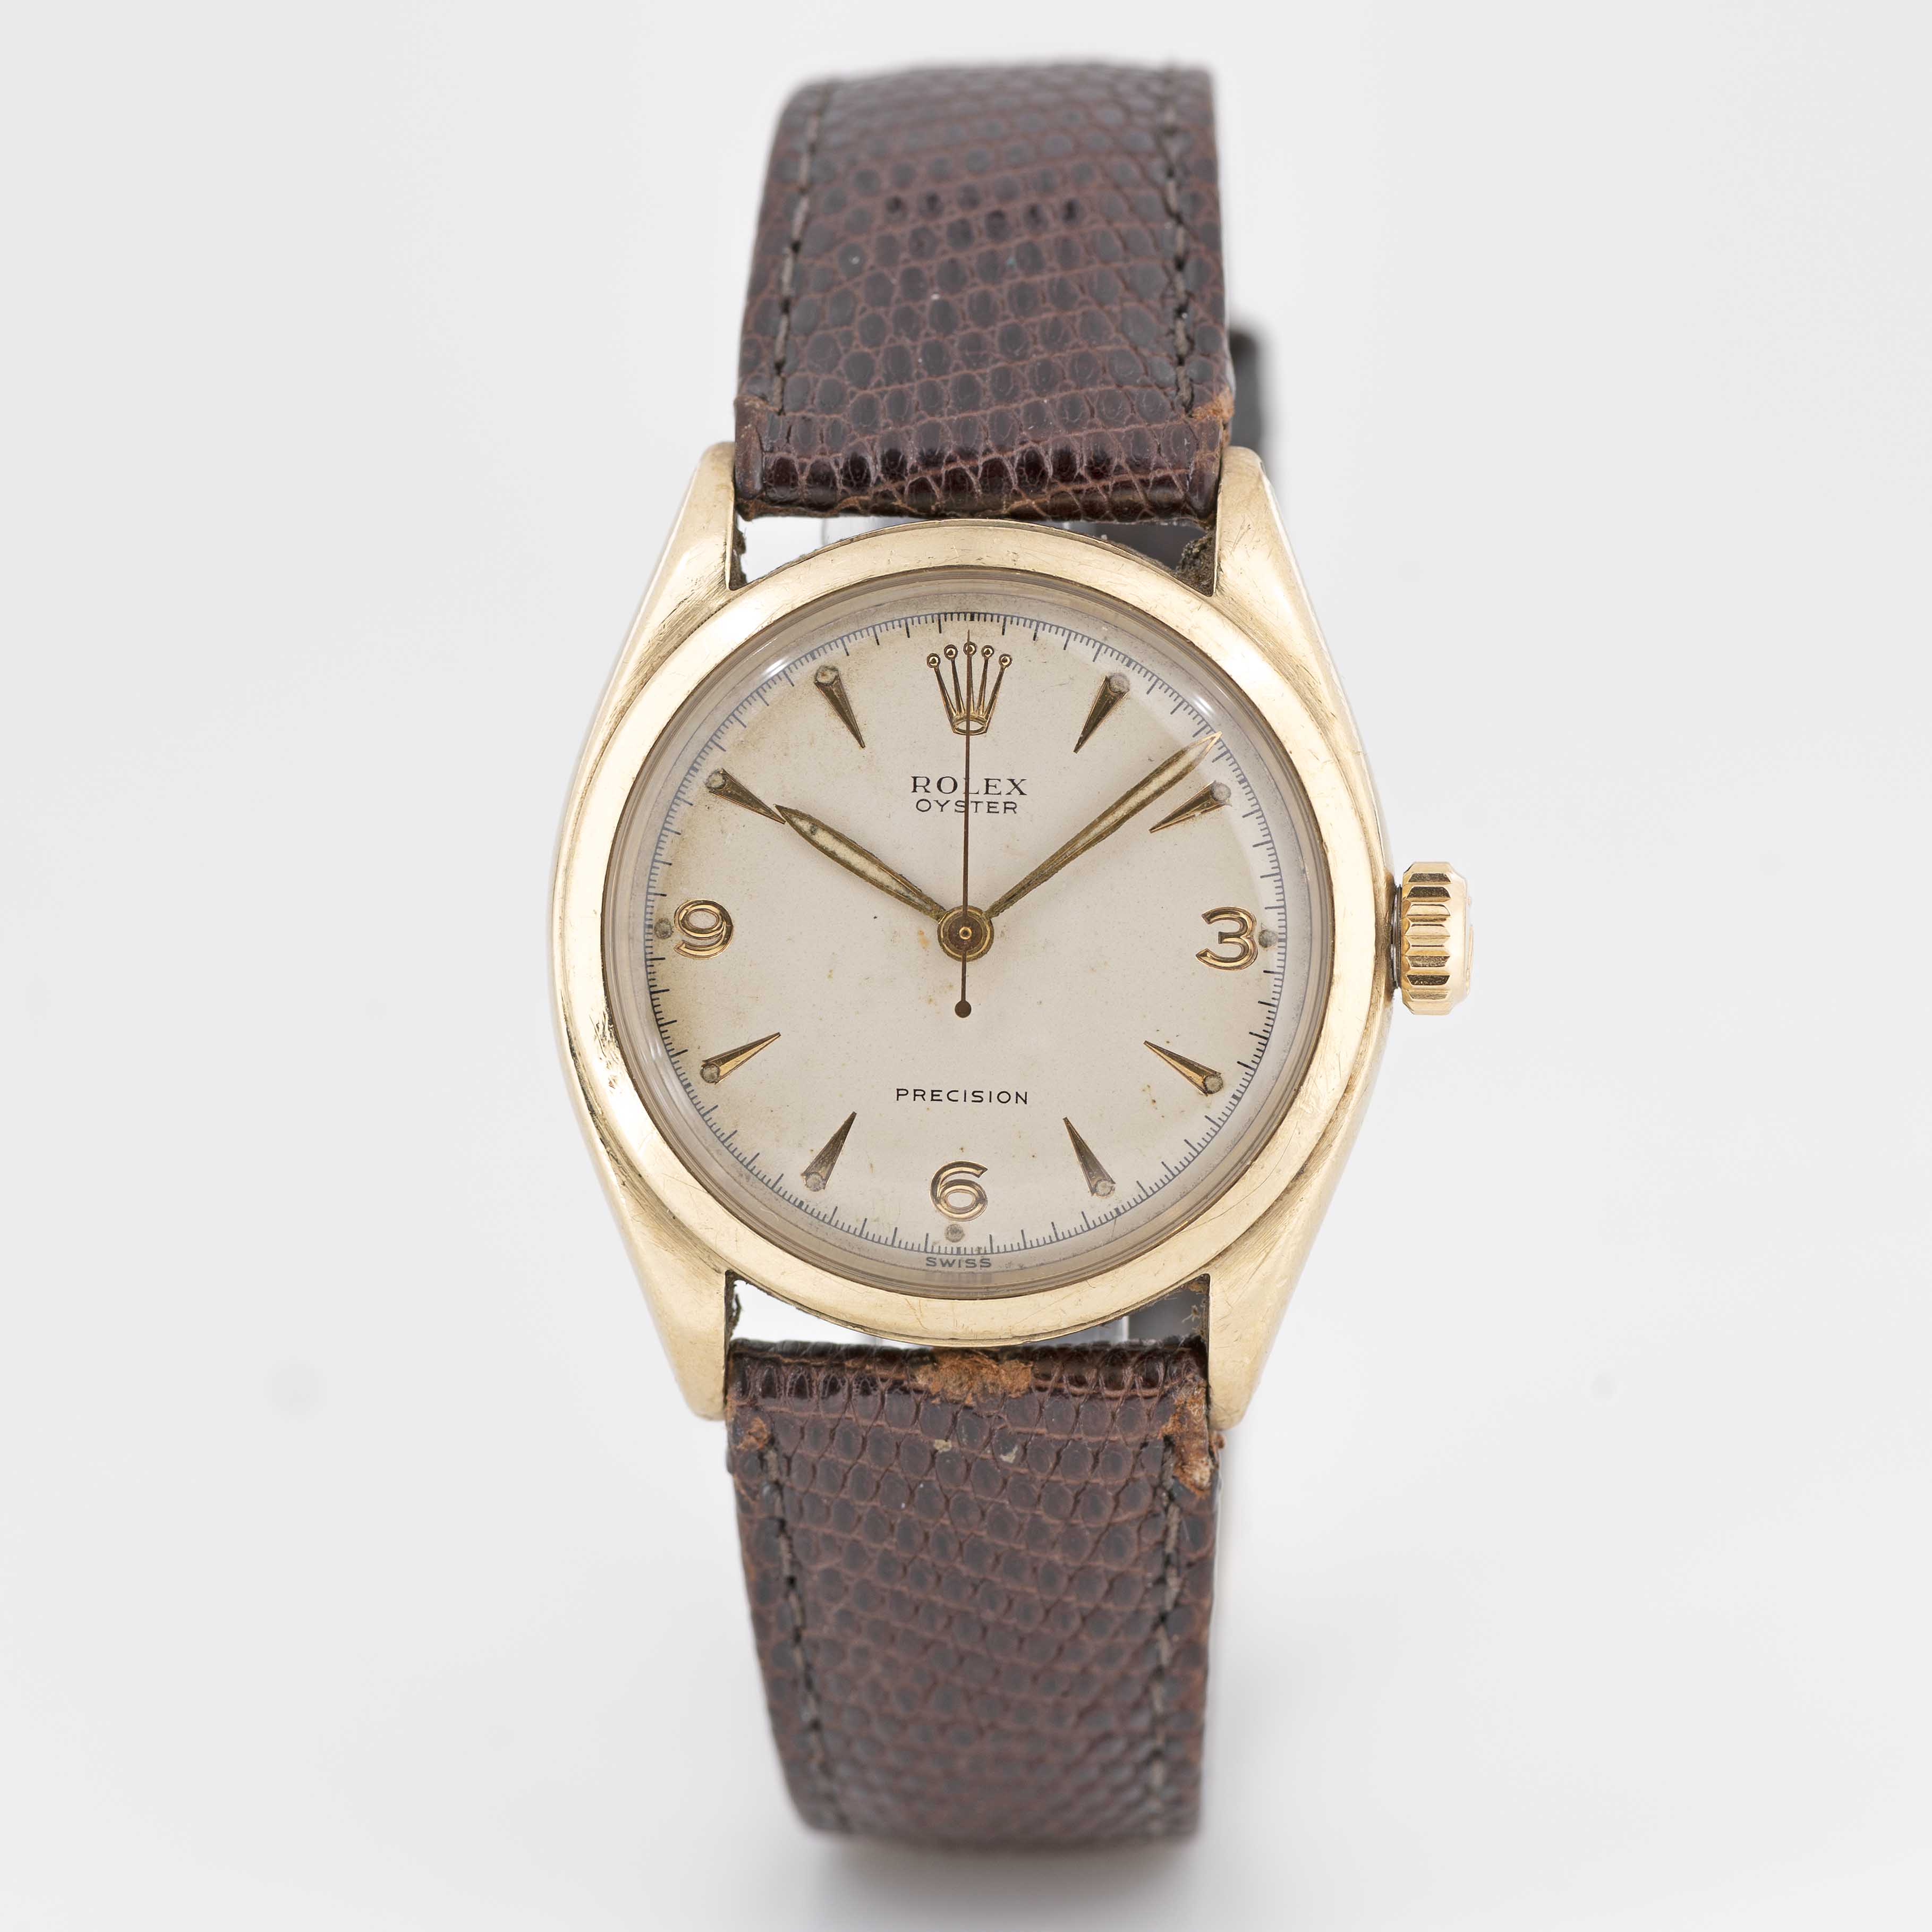 A RARE GENTLEMAN'S 10K SOLID GOLD ROLEX OYSTER PRECISION WRIST WATCH CIRCA 1952, REF. 6022 WITH 3- - Image 3 of 9